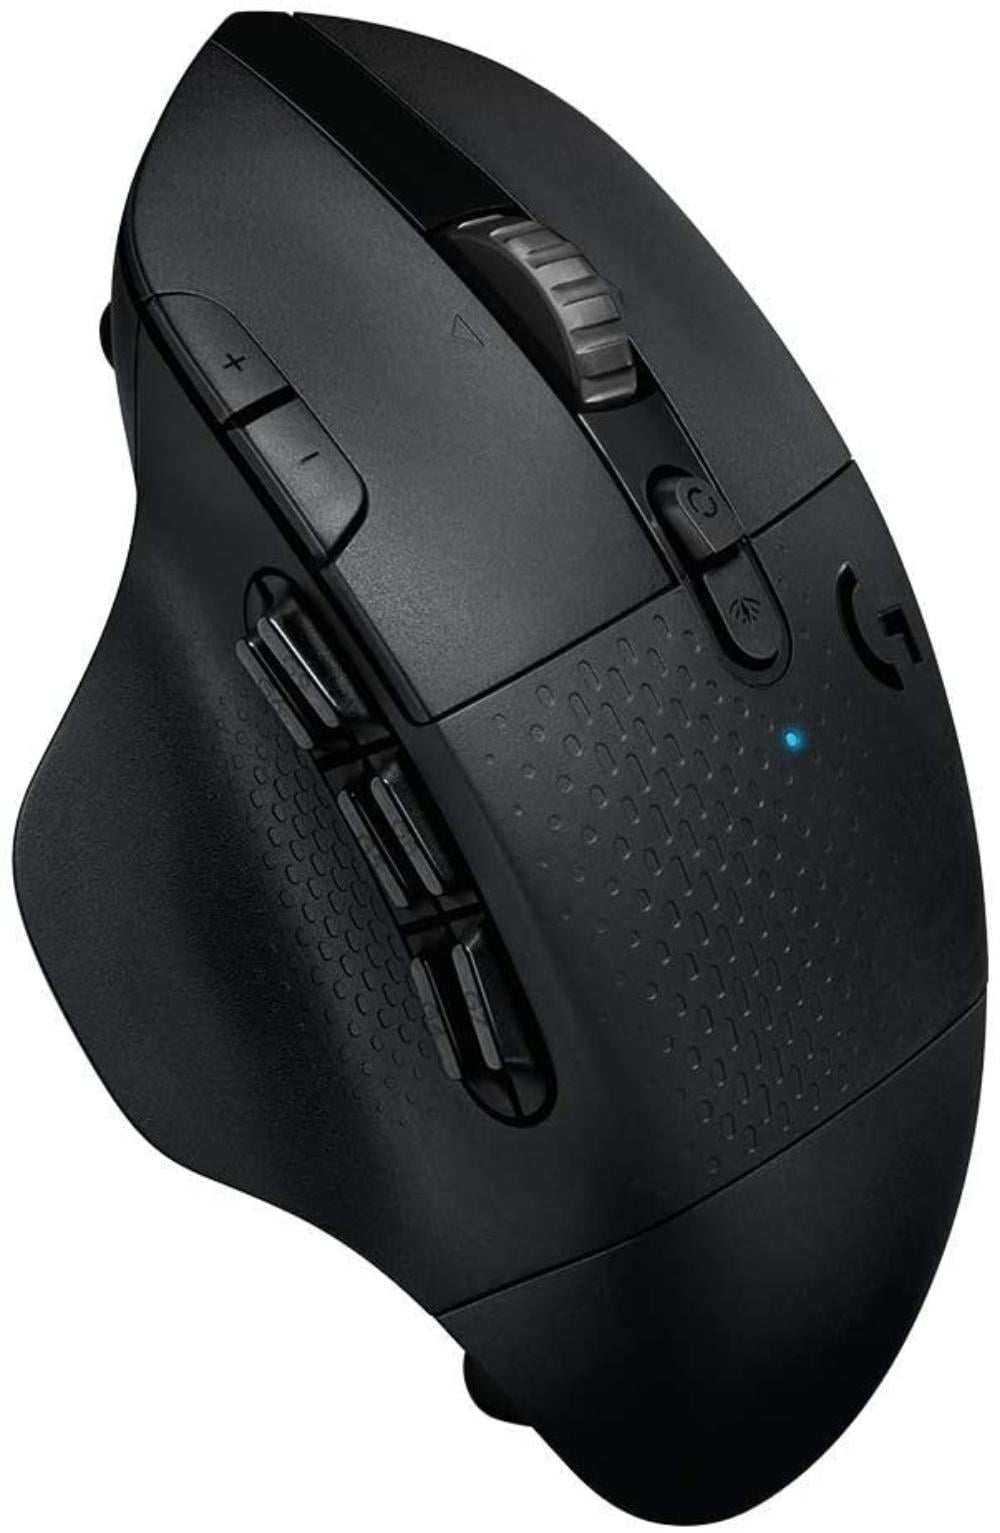 Logitech G604 Lightspeed Wireless Gaming Mouse 15 Programmable Controls Include 6 Thumb Buttons Fully Programmable With G Hub Software By Visit The Logitech G Store Walmart Com